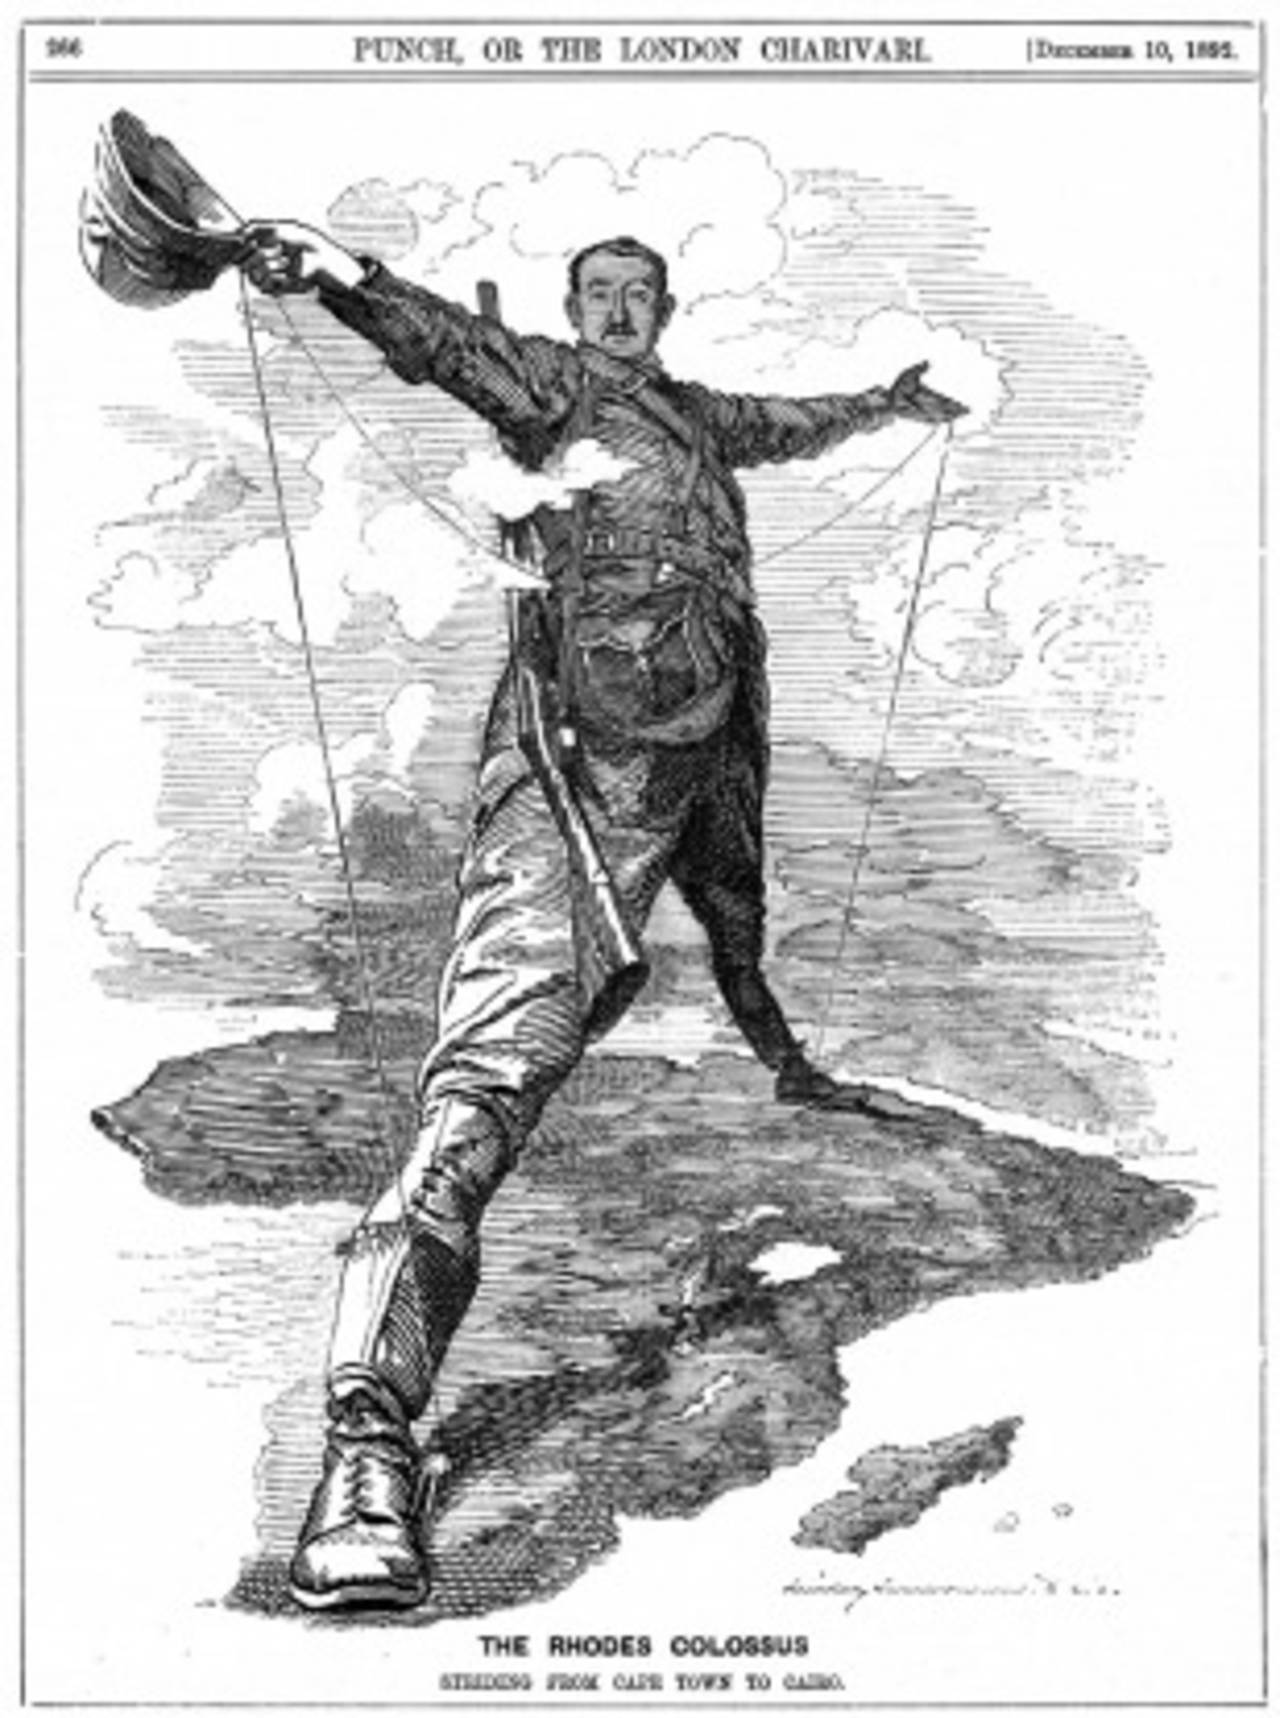 British colonial statesman and financier Cecil John Rhodes, who made a fortune from mining diamonds in South Africa and used his wealth to extend the British rule there. In 1890 he was made prime minister of Cape Colony. The area that was called Rhodesia (now Zimbabwe) was named after him, Punch magazine, December 10, 1892